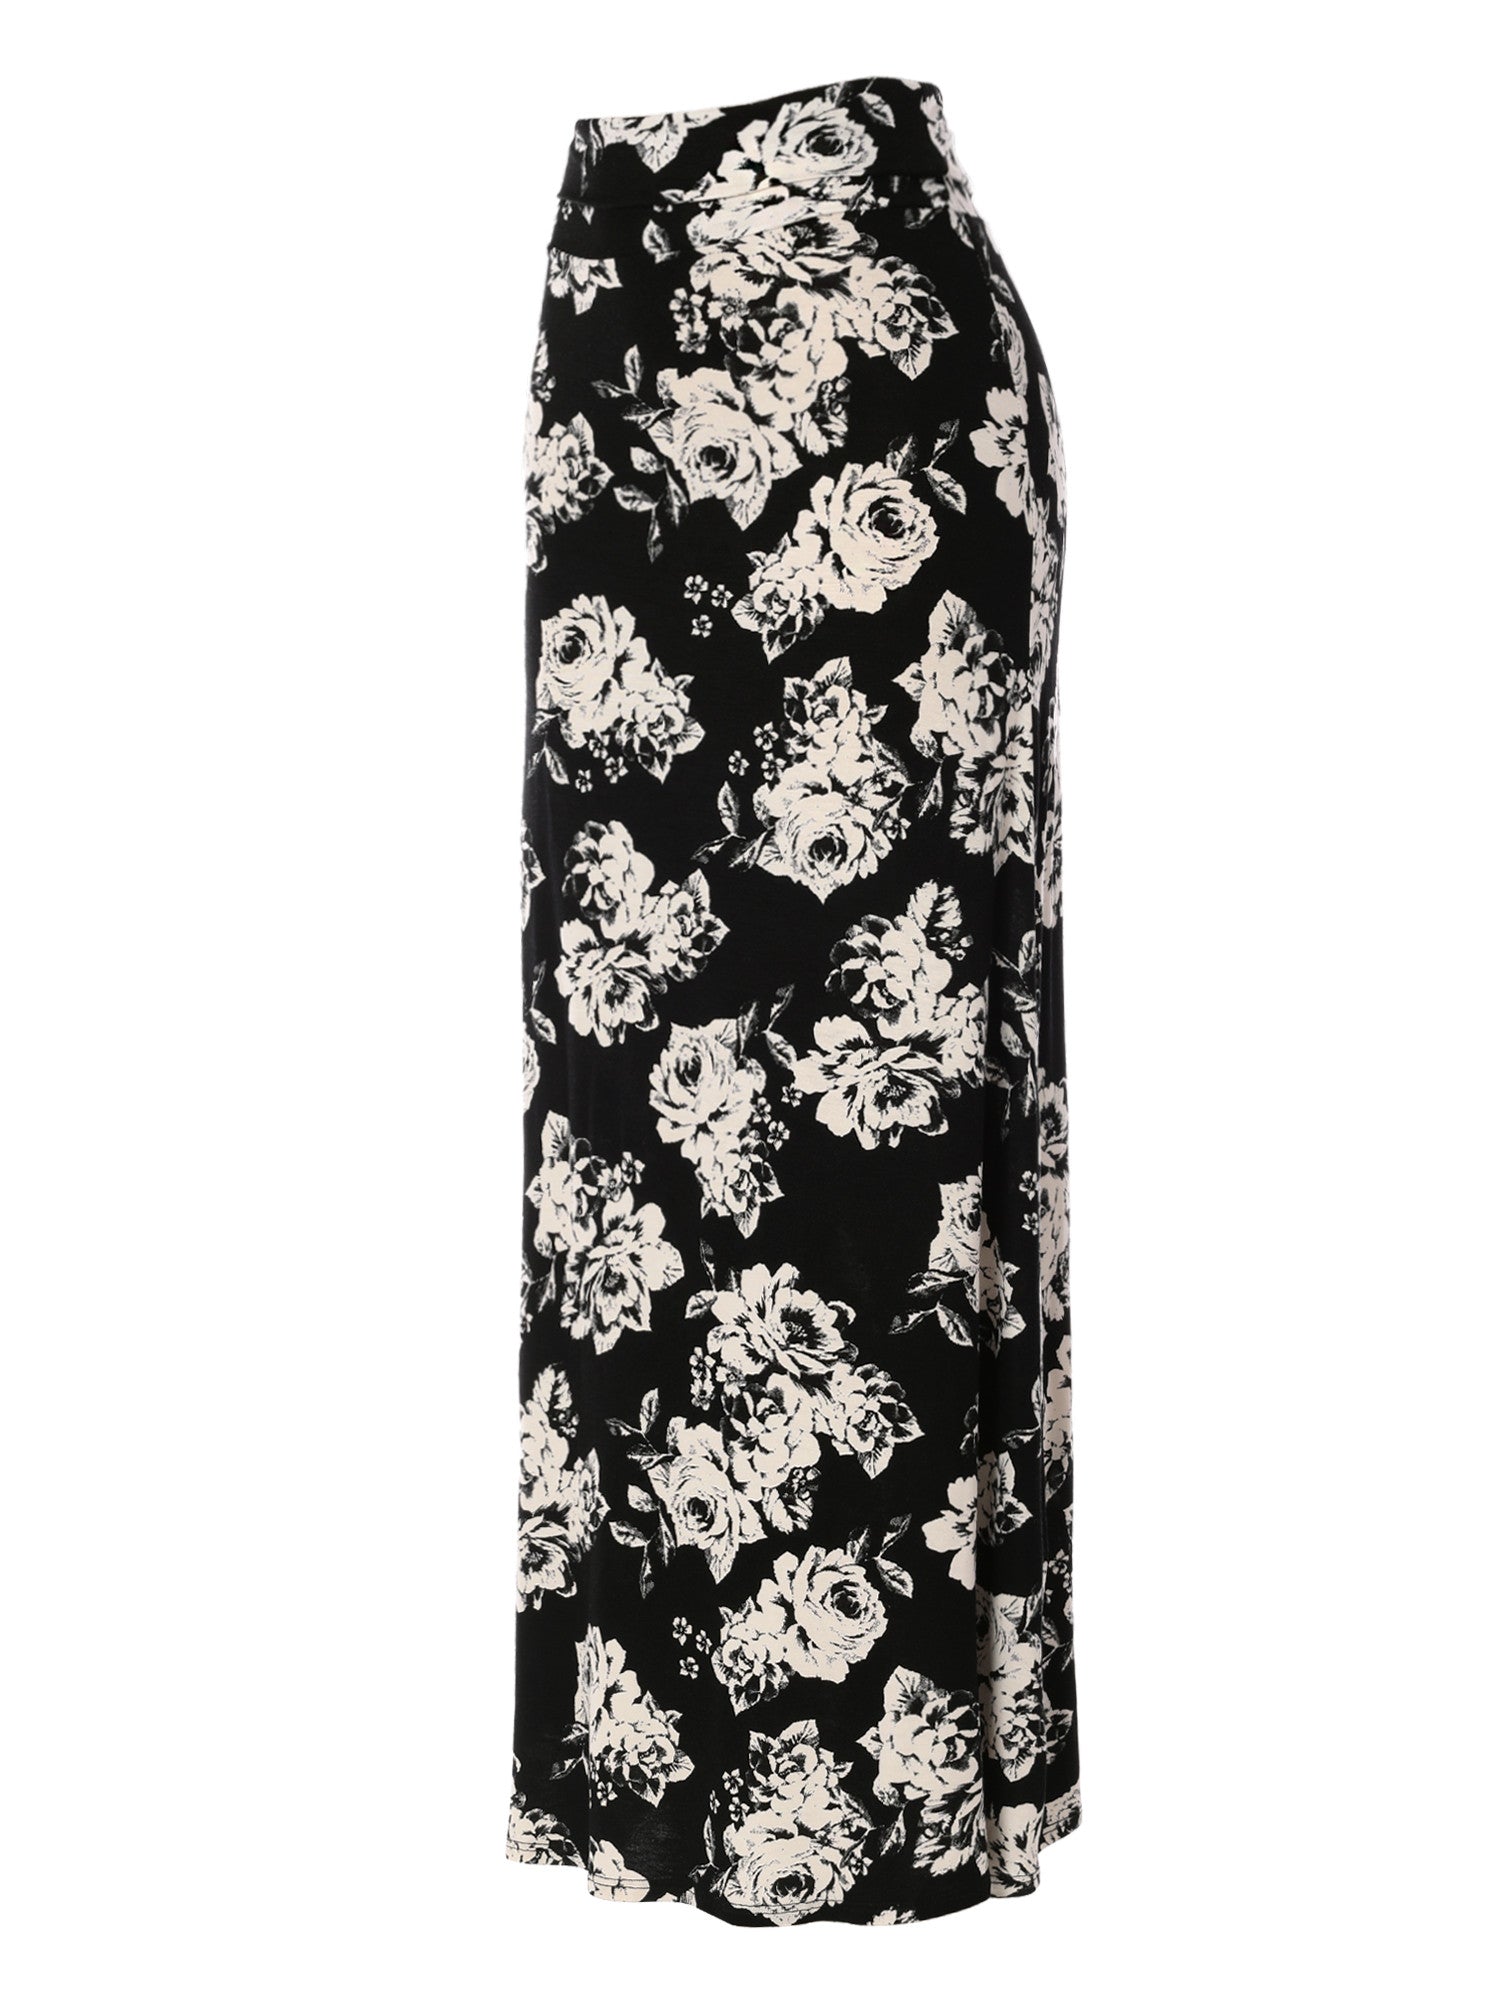 Stretchy High Waisted Floral Patterned Maxi Skirt